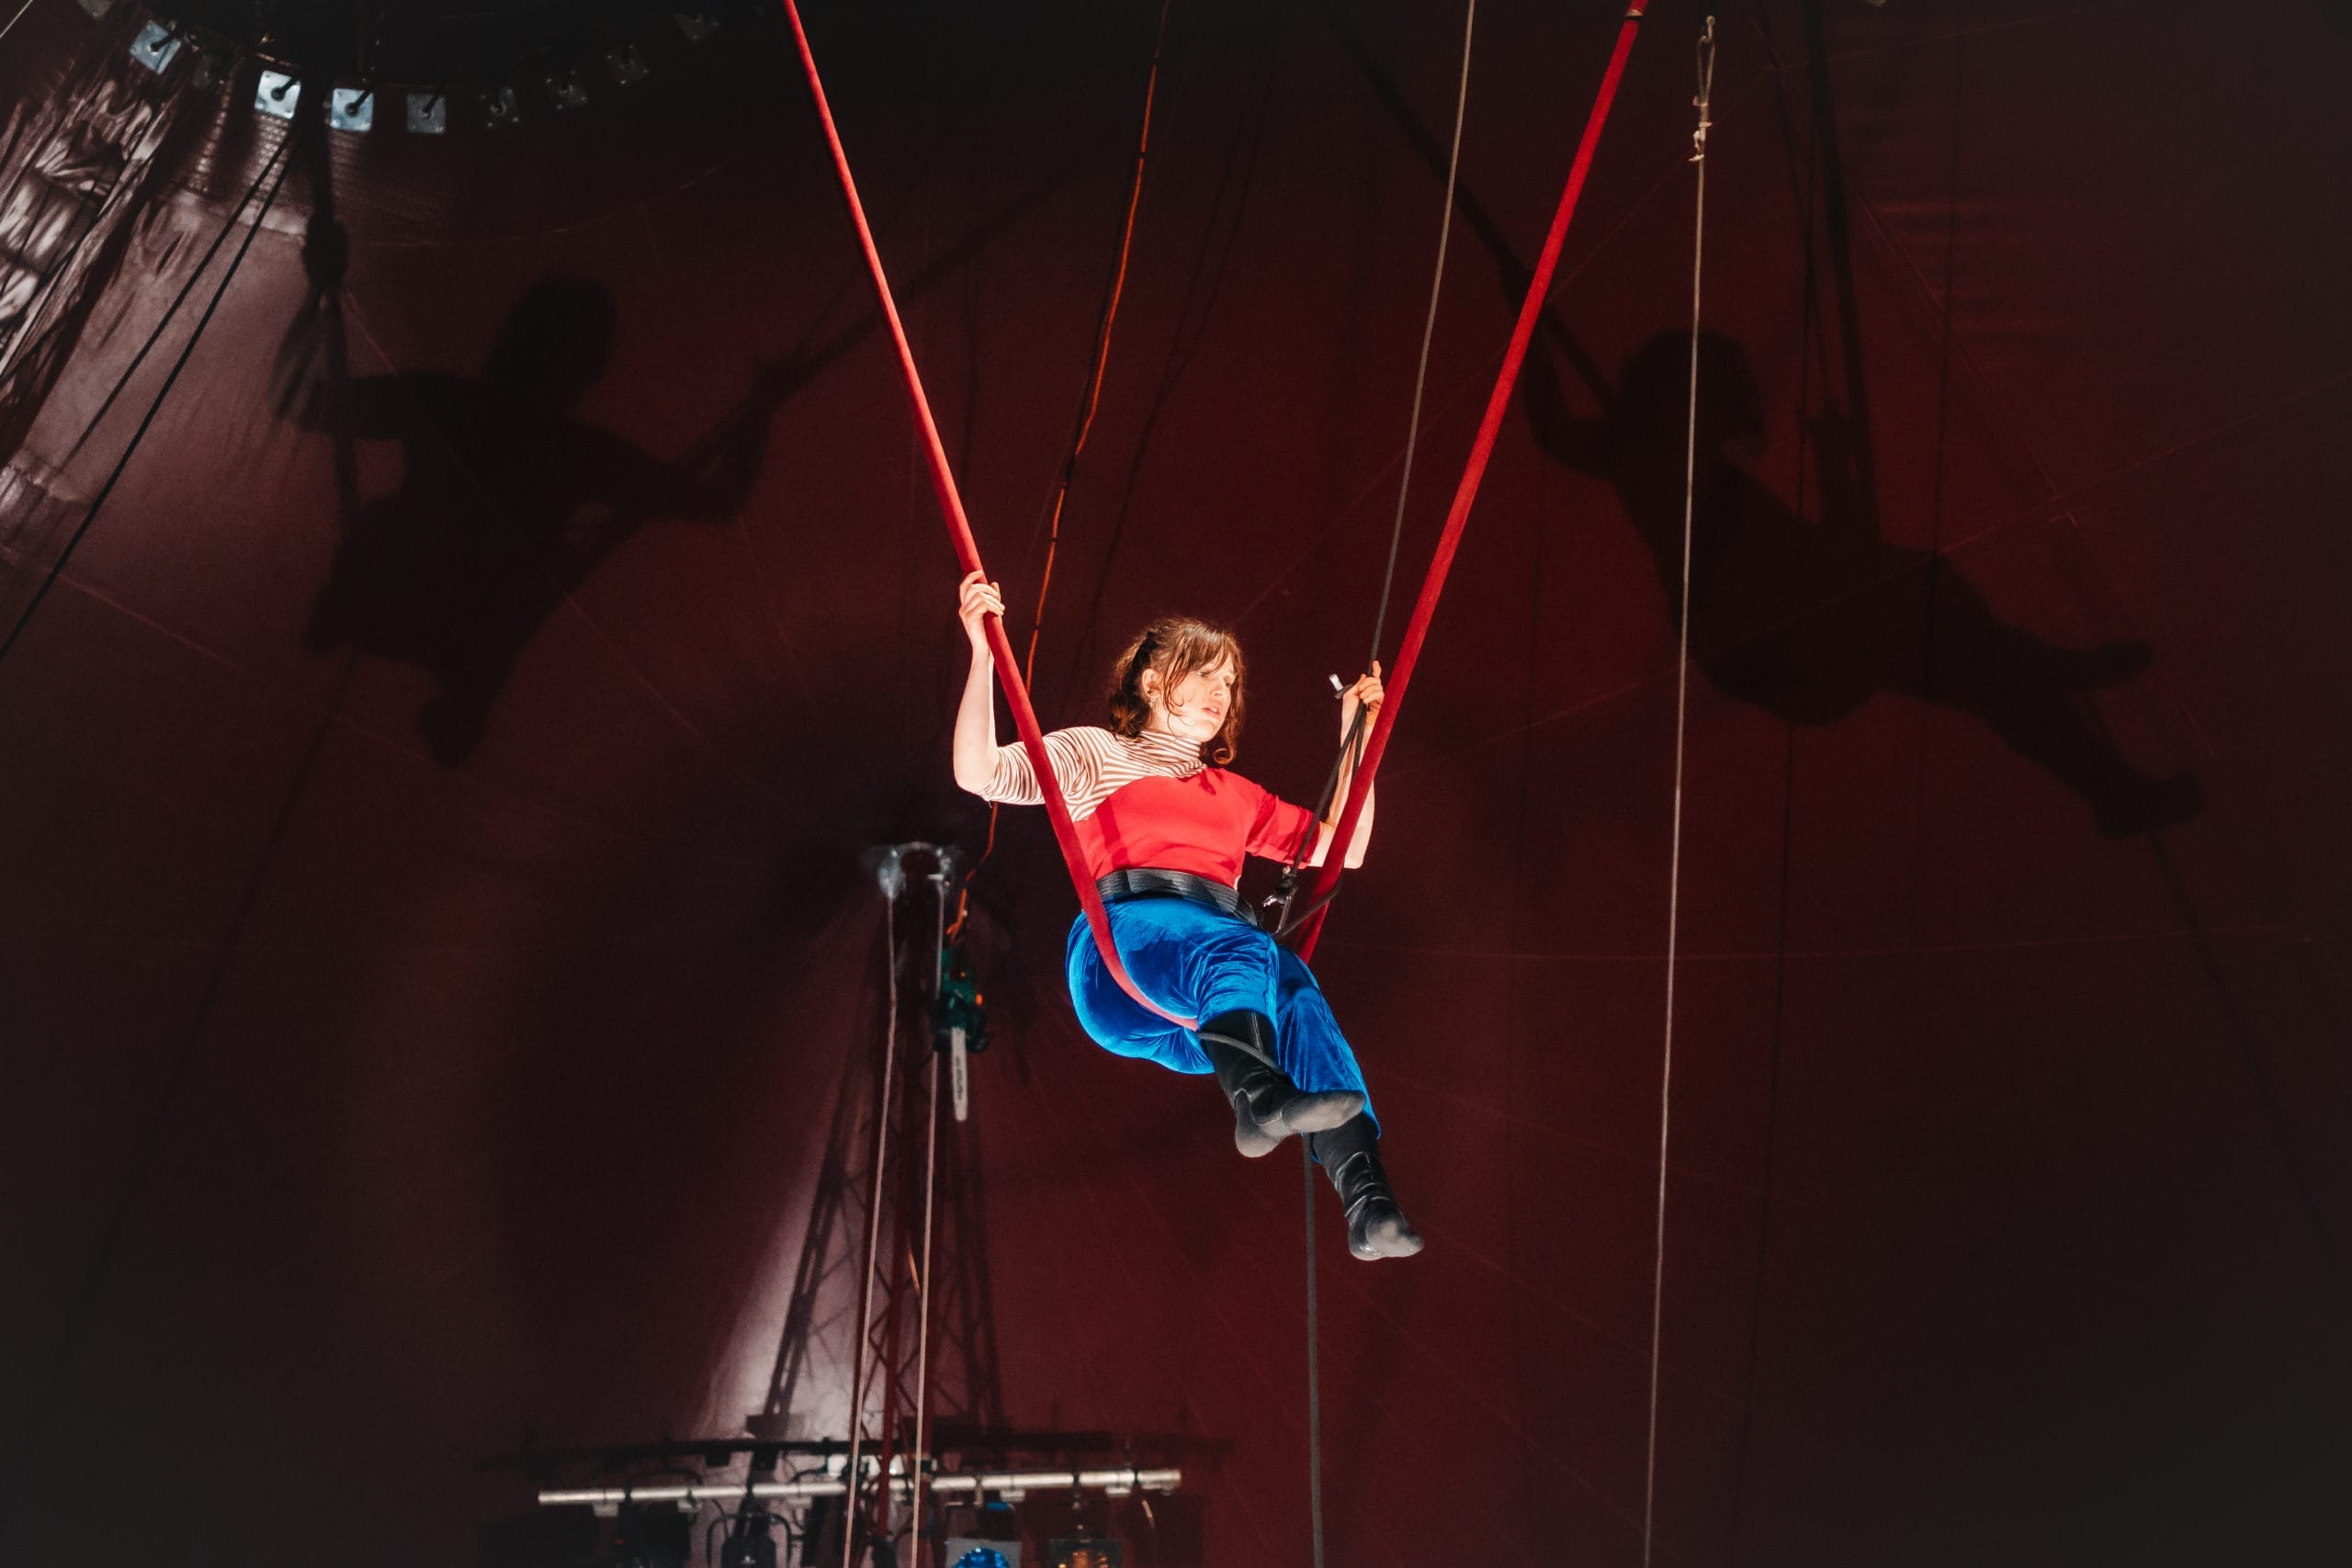 A Revel Puck circus performer is sat in a swing-like position on a high trapeze. The trapeze rope is red and the performer wears a red shirt and vibrant blue trousers.